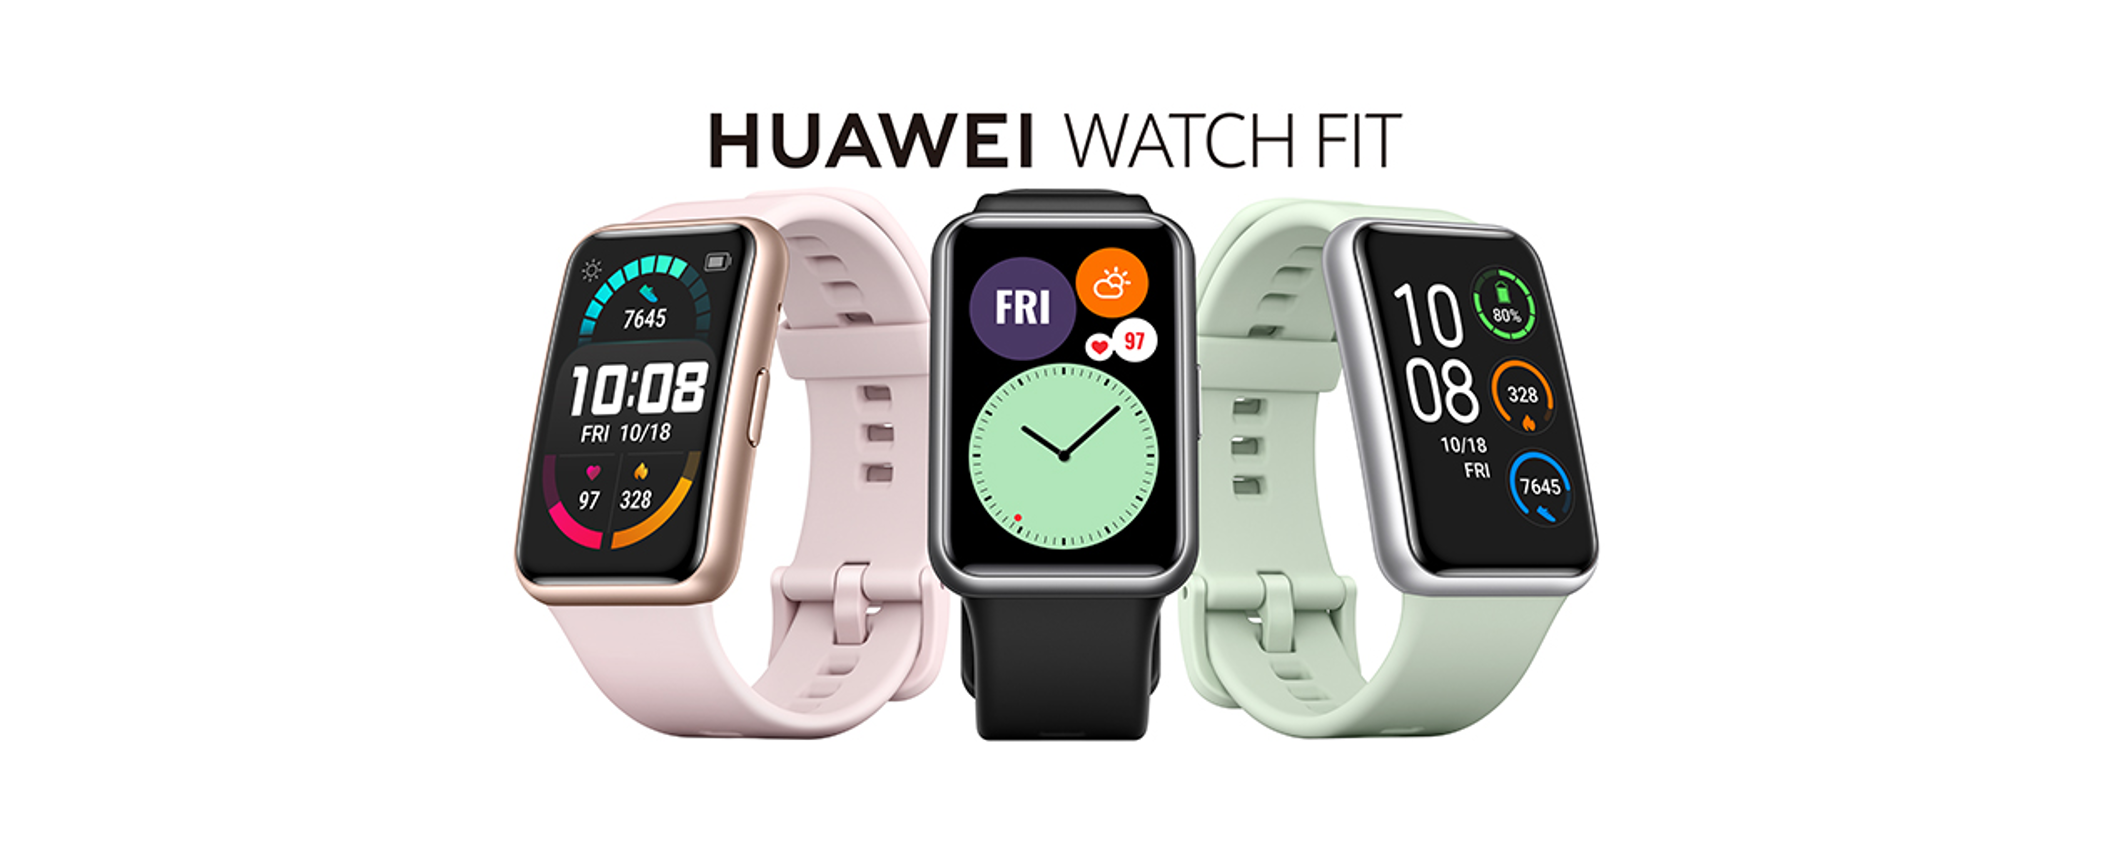 Huawei Watch Fit con display AMOLED e GPS: già tuo con 109€